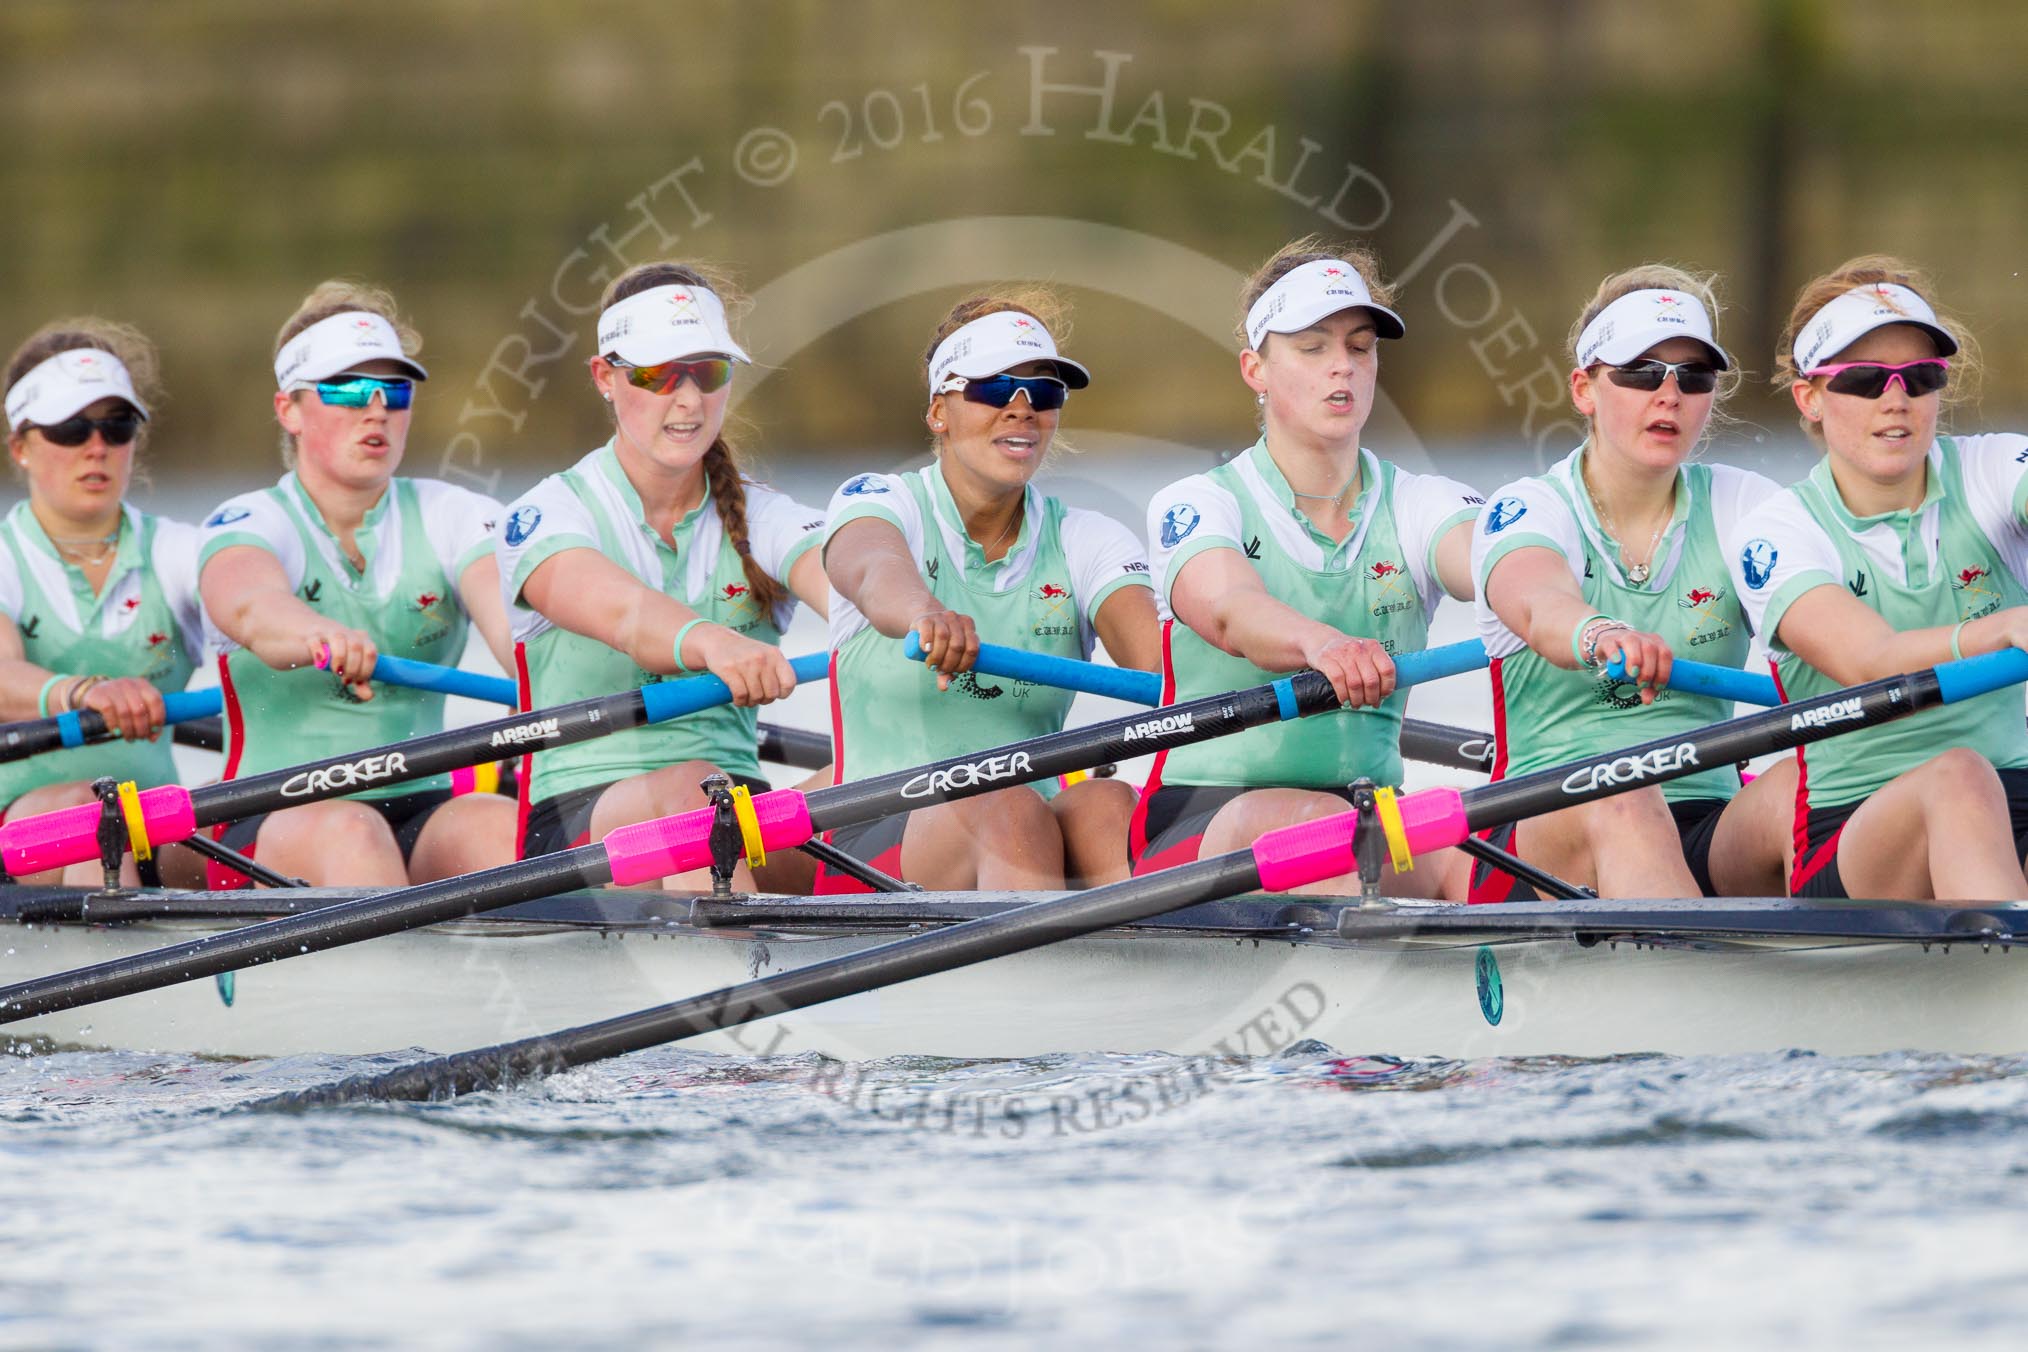 The Boat Race season 2016 -  The Cancer Research Women's Boat Race.
River Thames between Putney Bridge and Mortlake,
London SW15,

United Kingdom,
on 27 March 2016 at 14:16, image #219